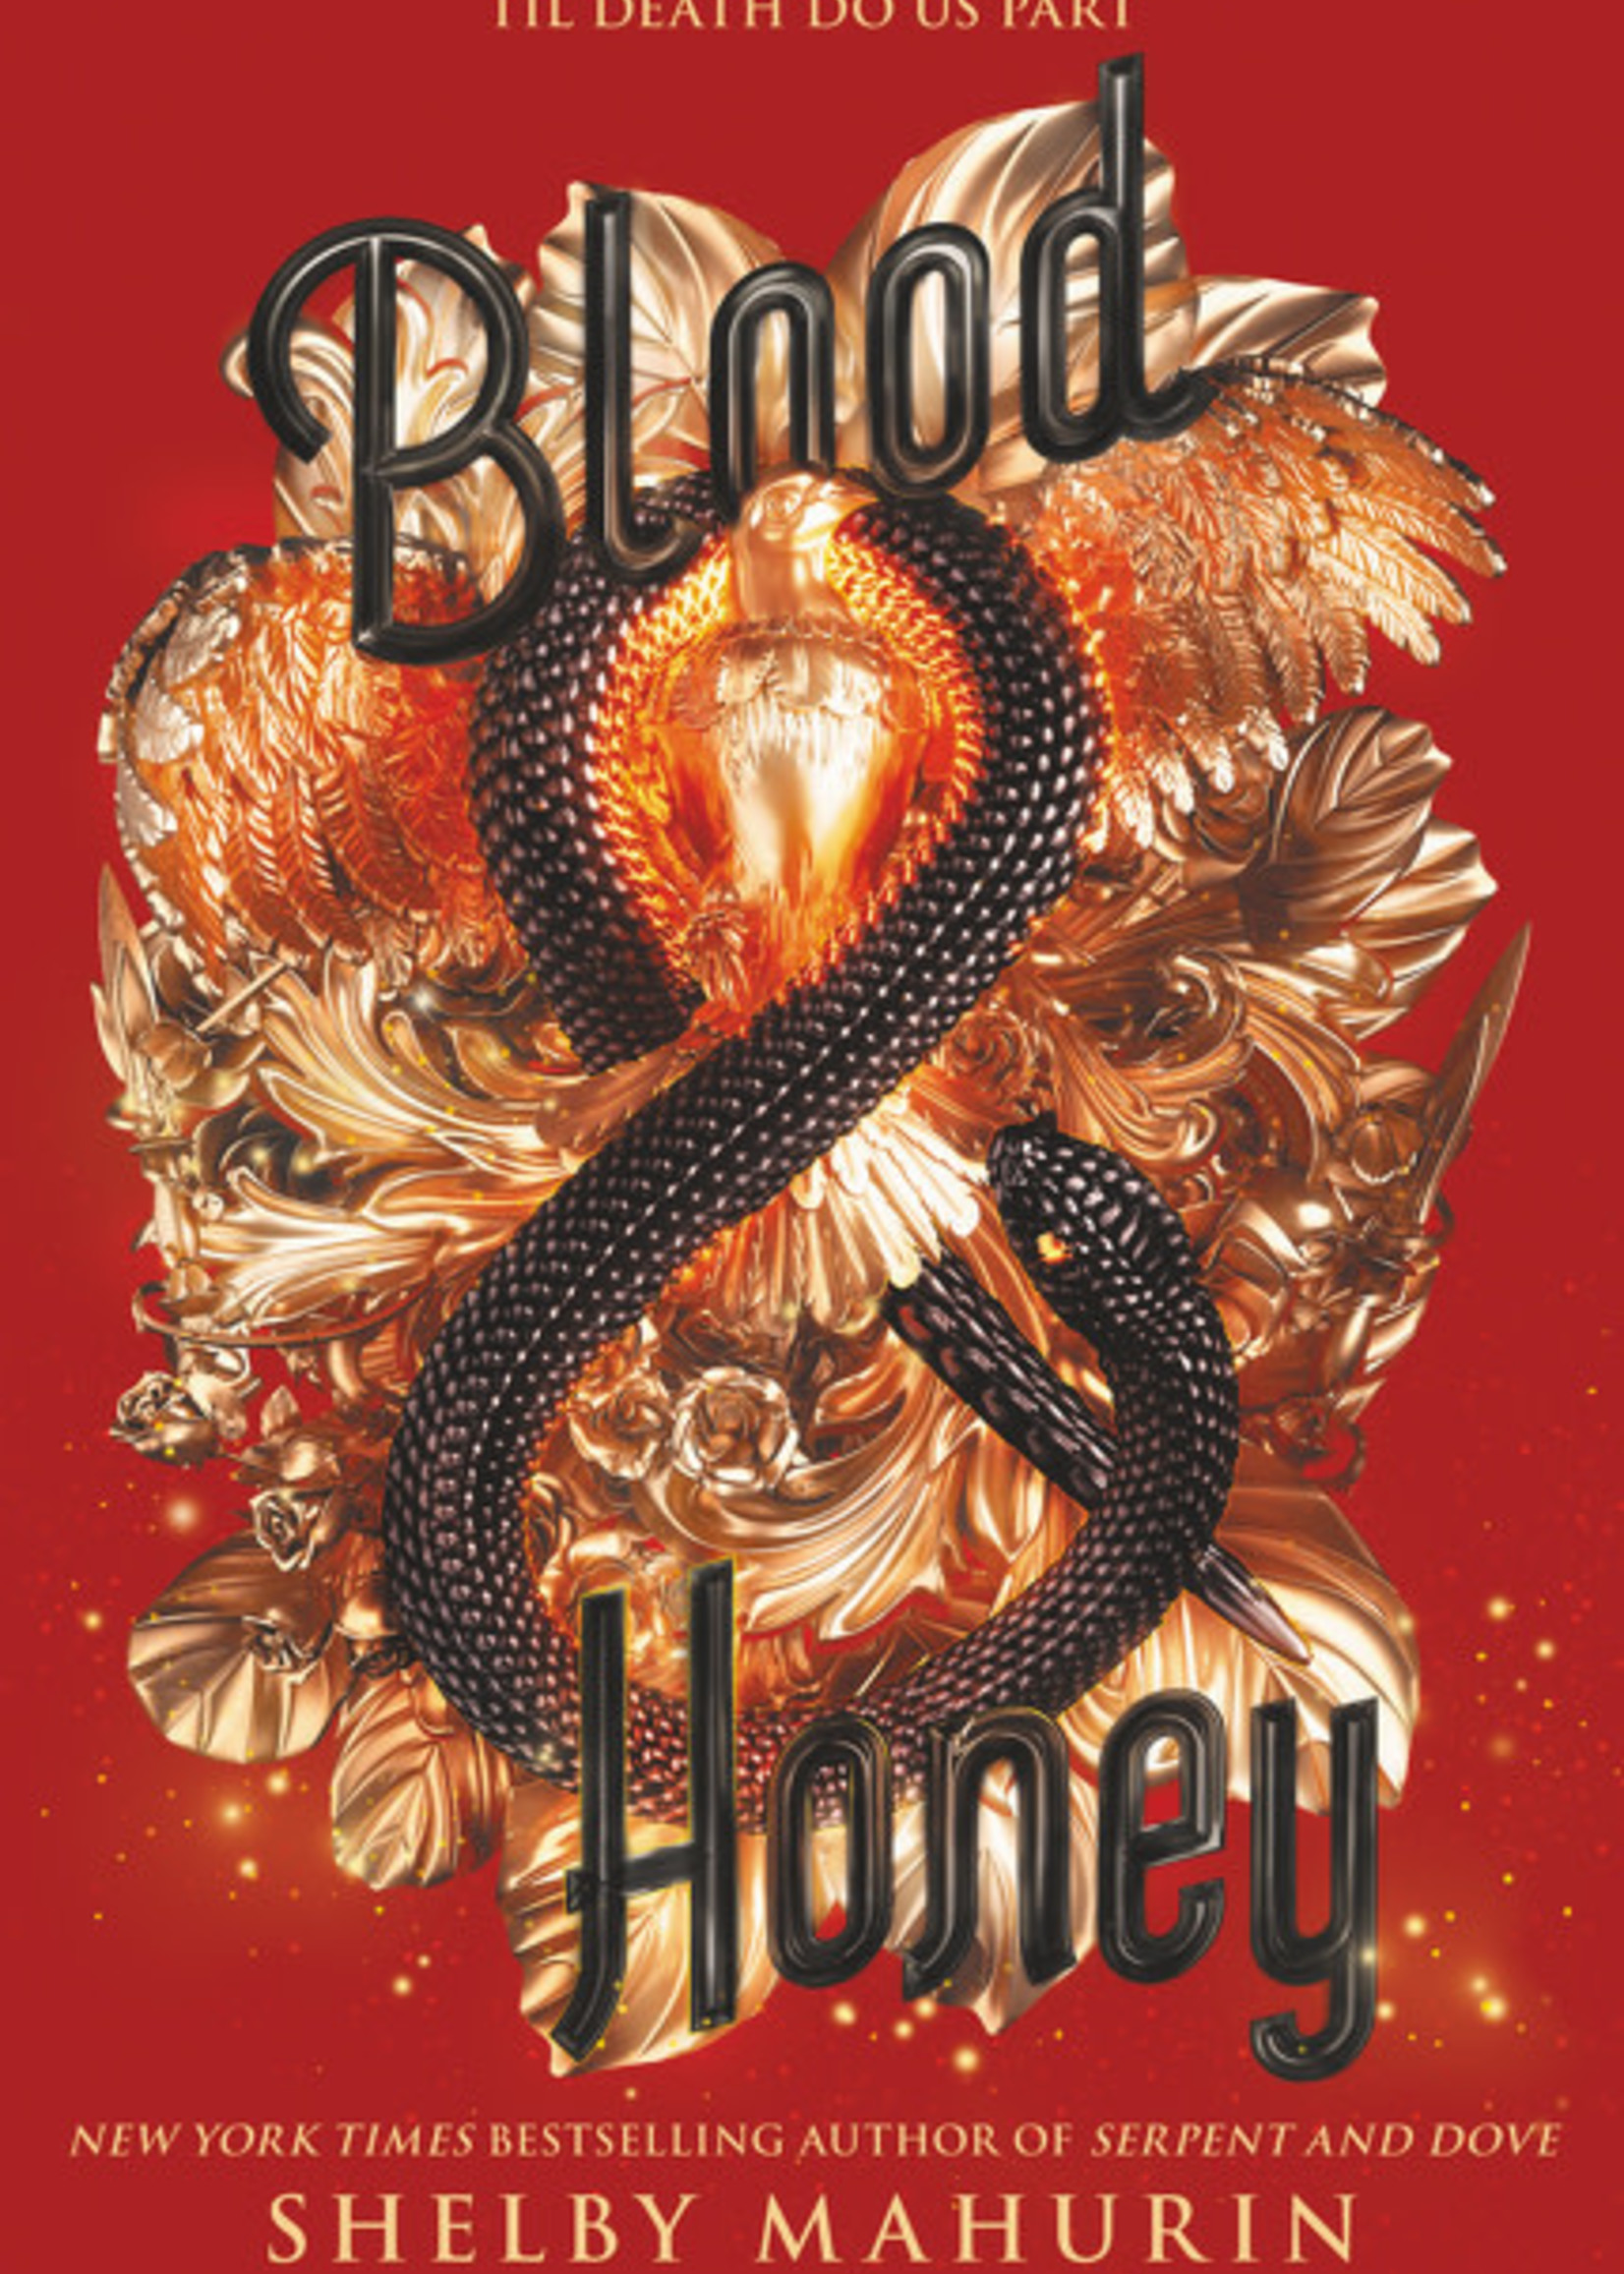 Blood & Honey (Serpent & Dove #2) by Shelby Mahurin